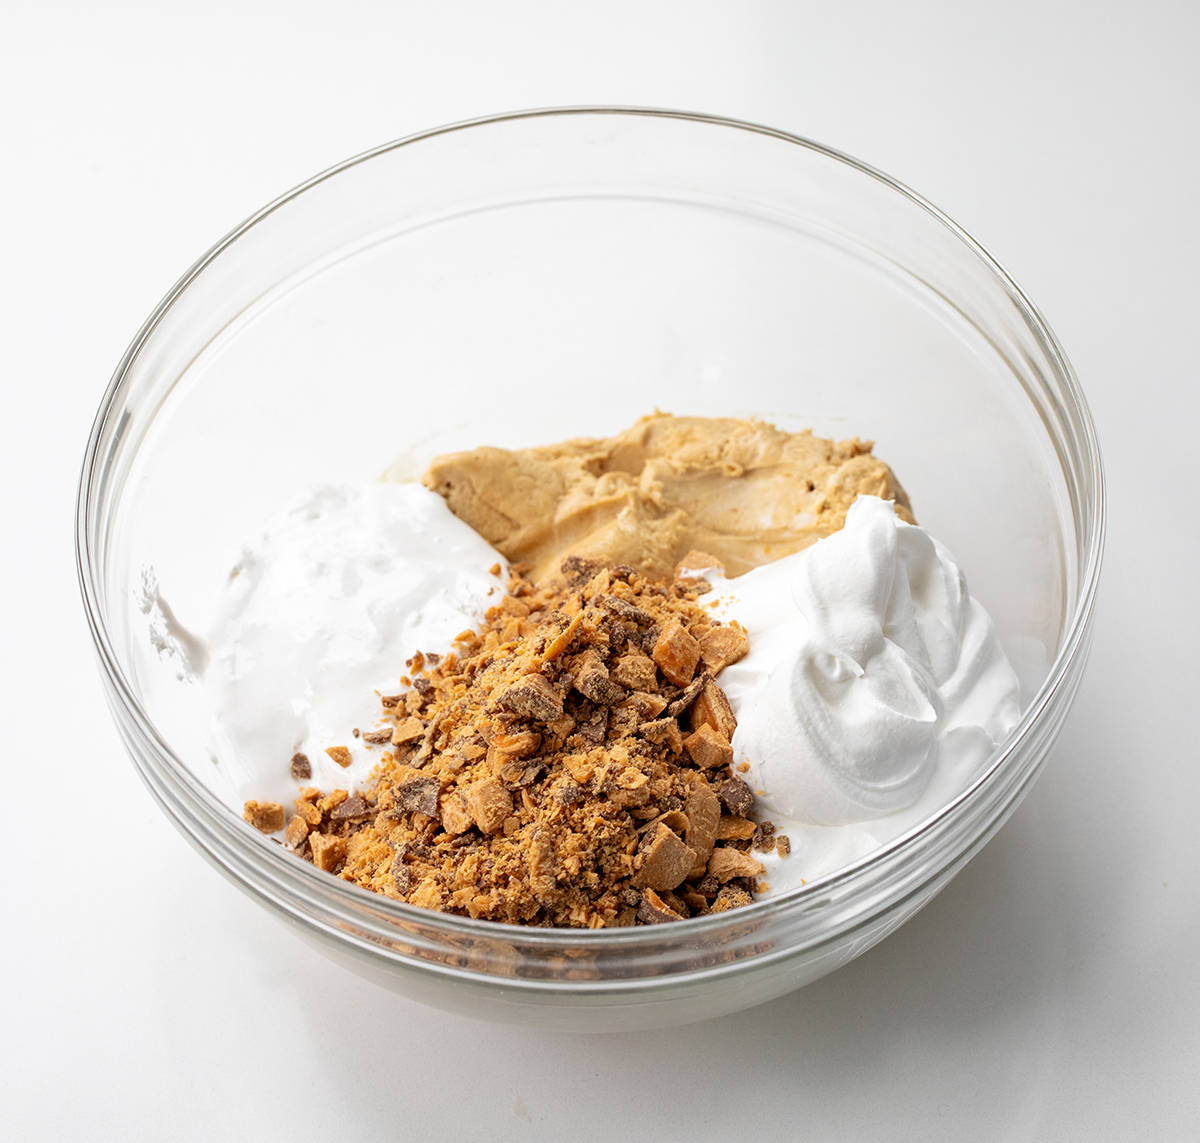 Ingredients used to make Butterfinger Dip in a bowl before mixing.